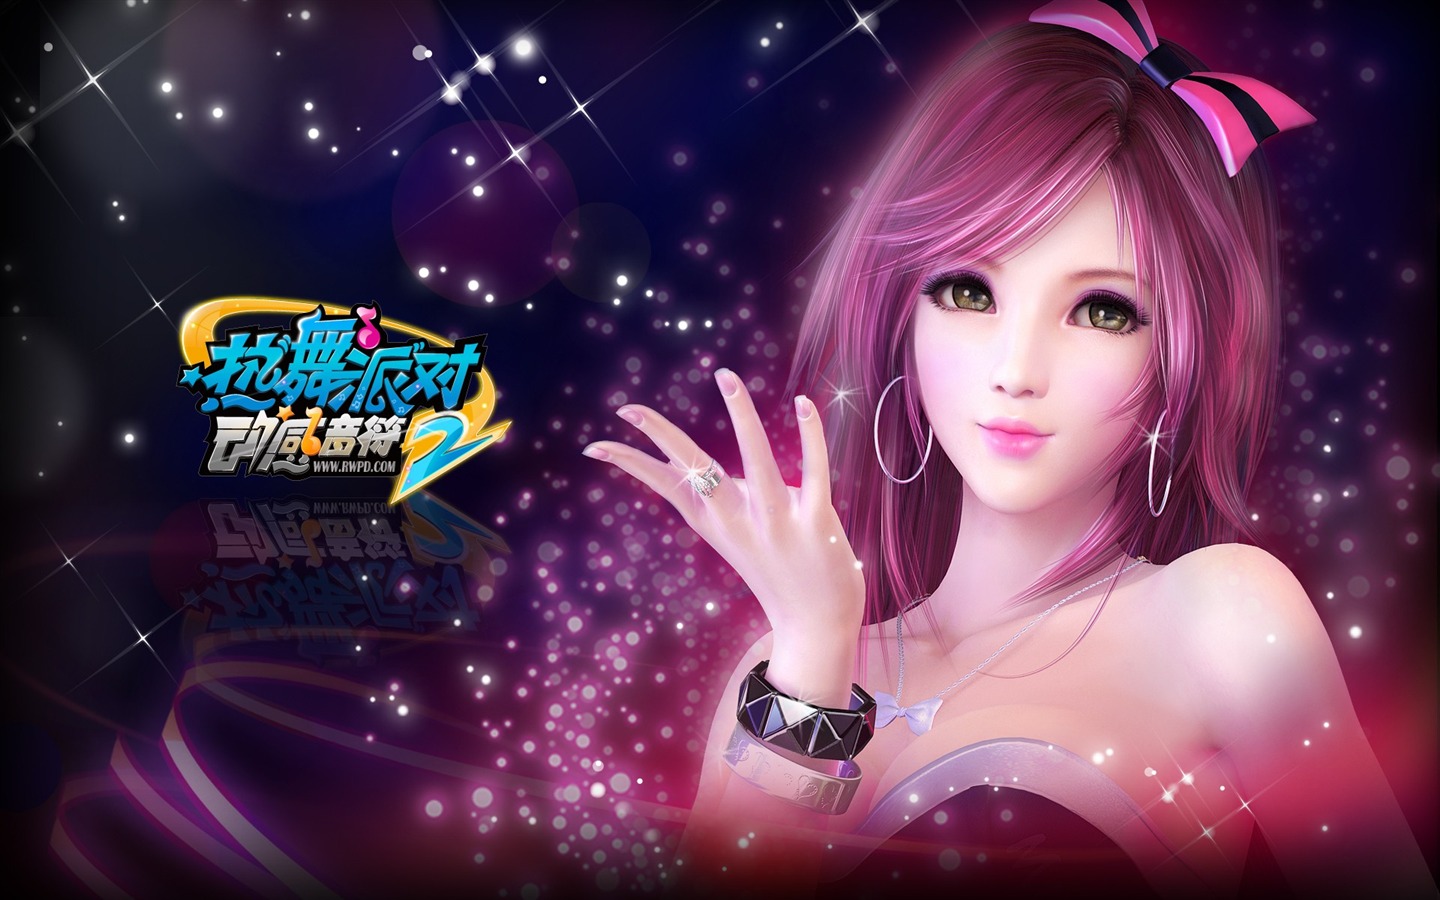 Online game Hot Dance Party II official wallpapers #26 - 1440x900